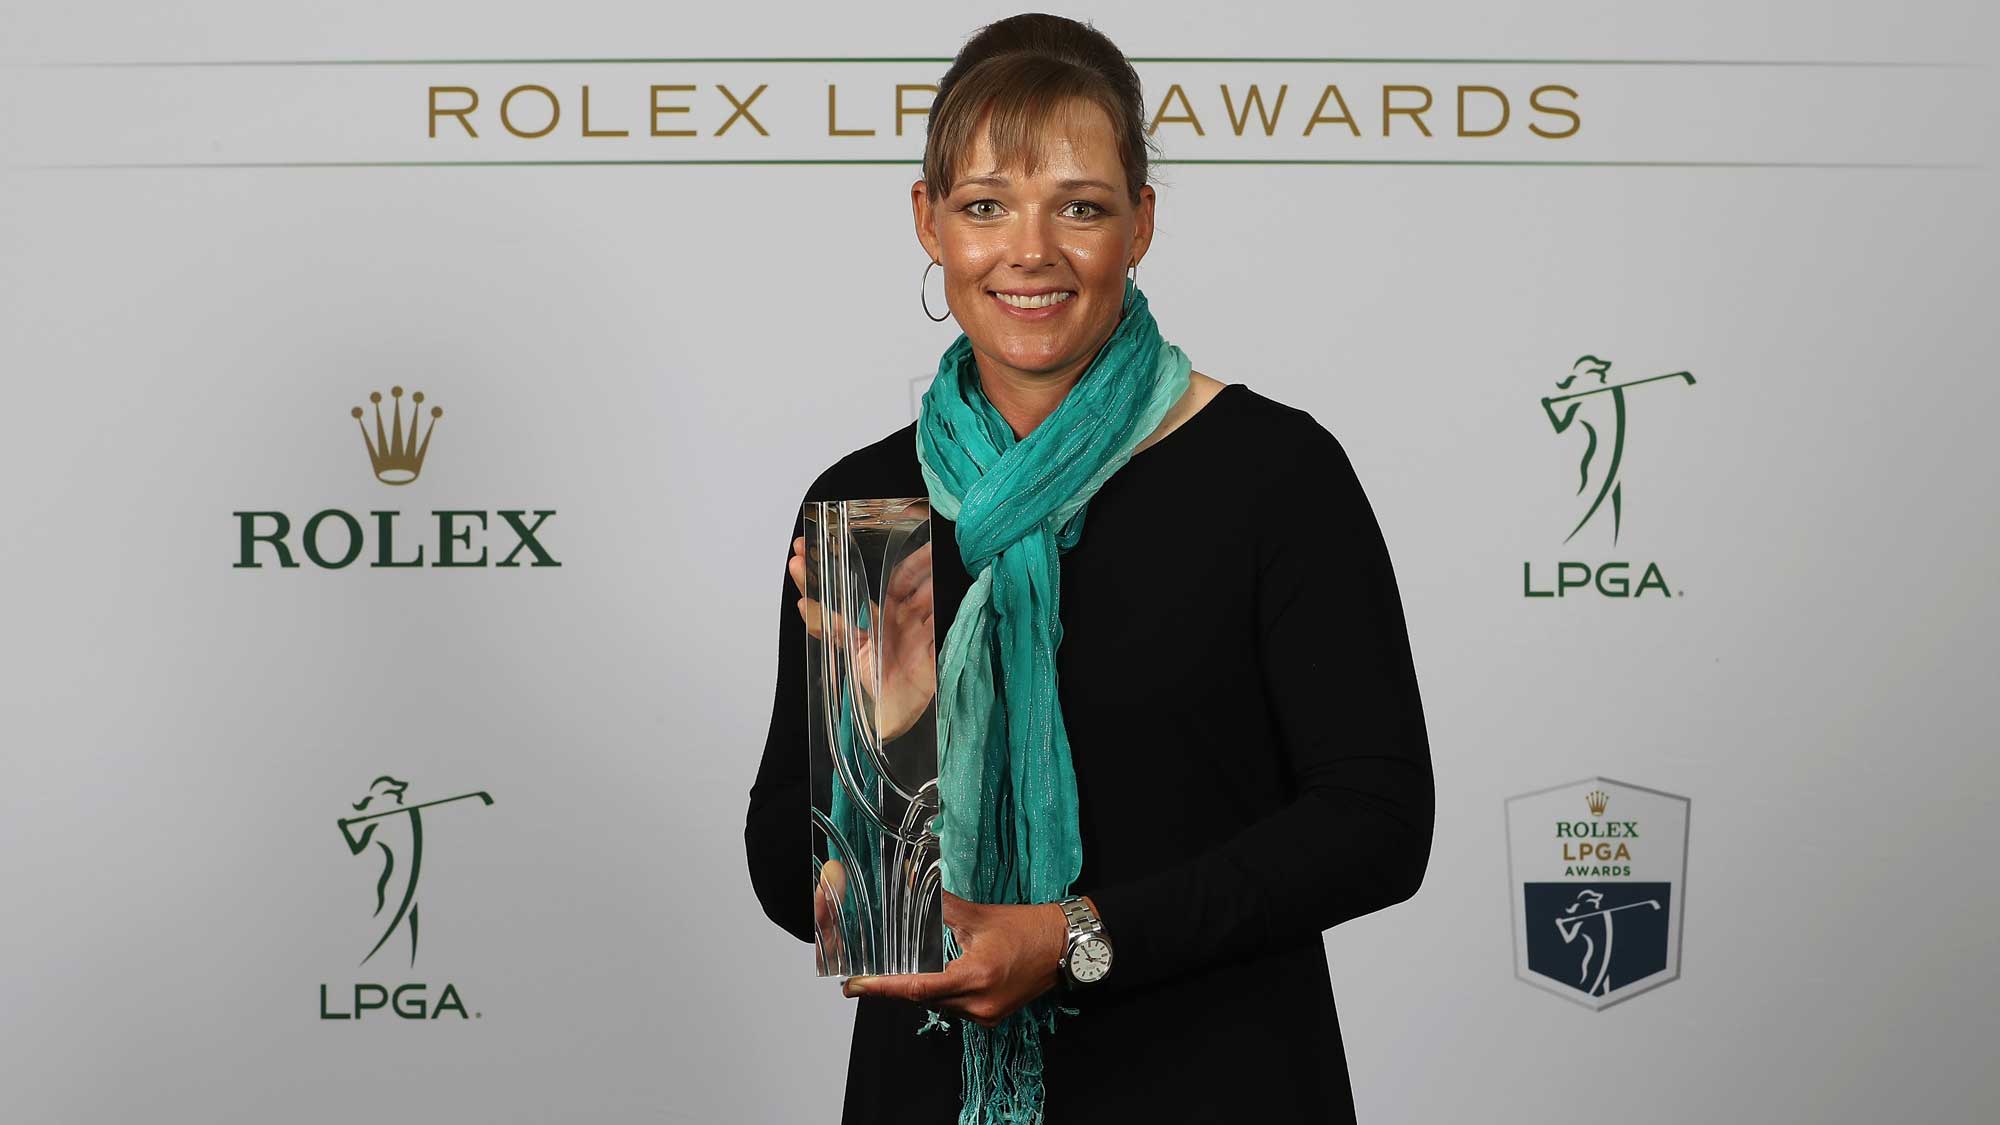 William and Mousie Powell Award recipient Katherine Kirk of Australia poses for a portrait during the LPGA Rolex Players Awards at The Ritz-Carlton Golf Resort